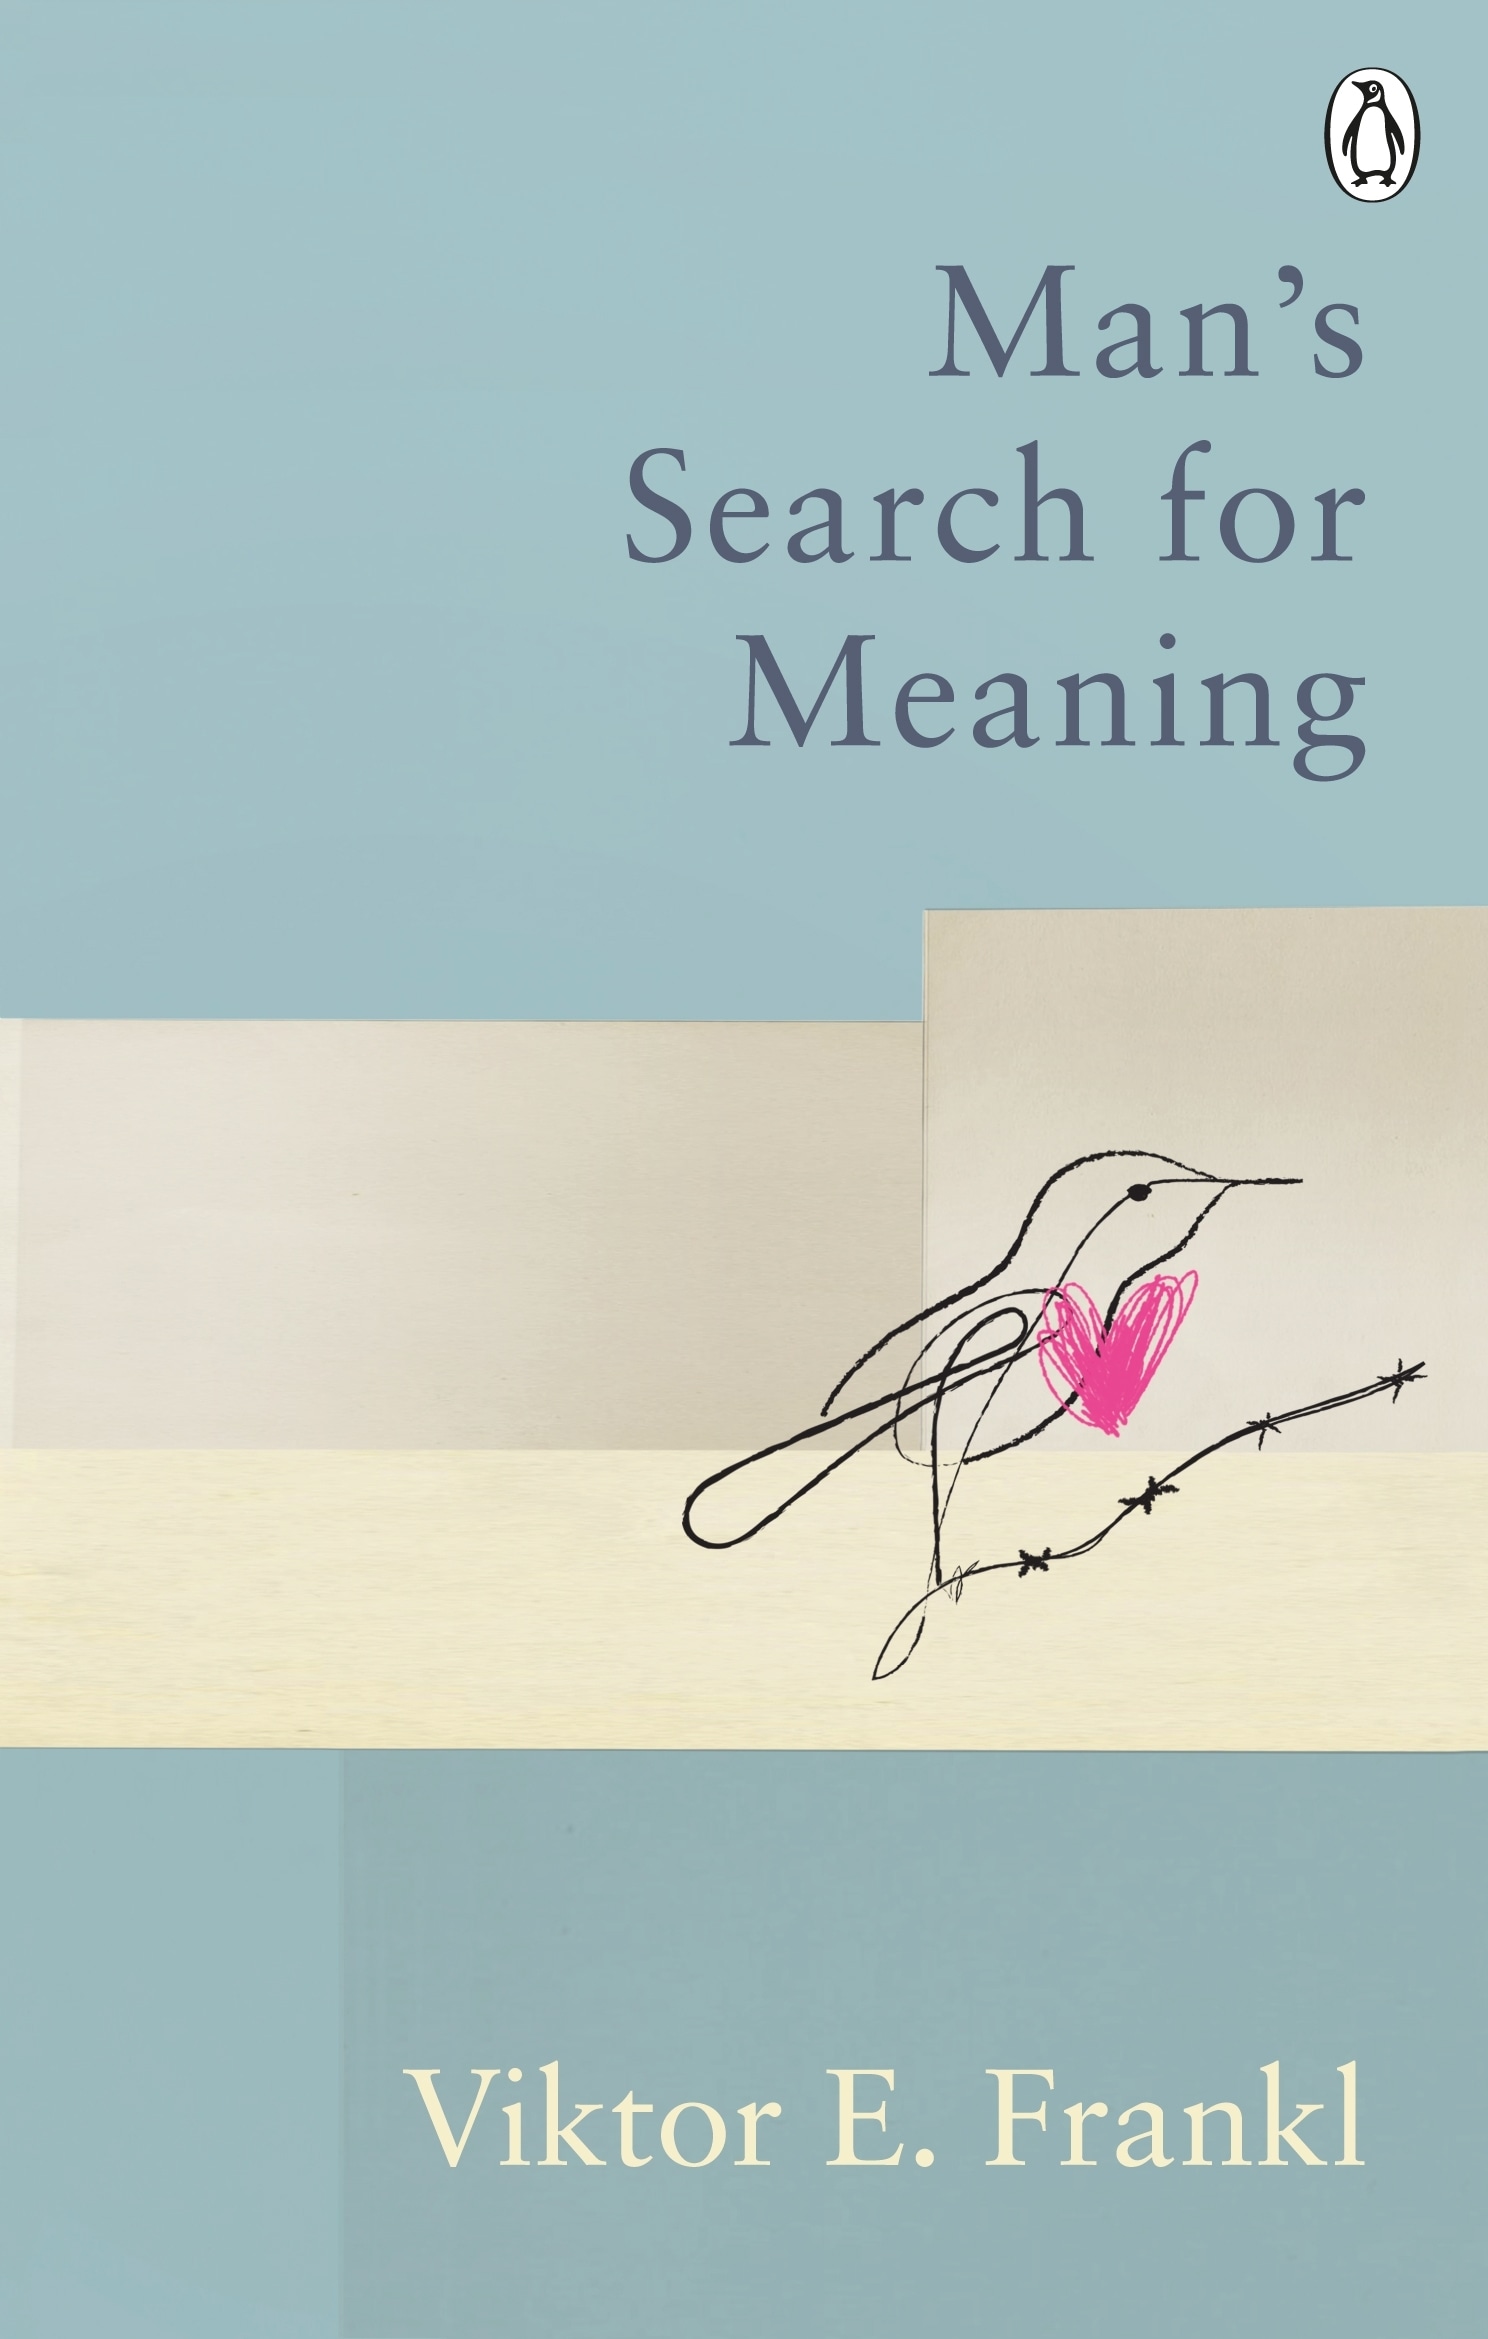 Book “Man's Search For Meaning” by Viktor E Frankl — January 7, 2021